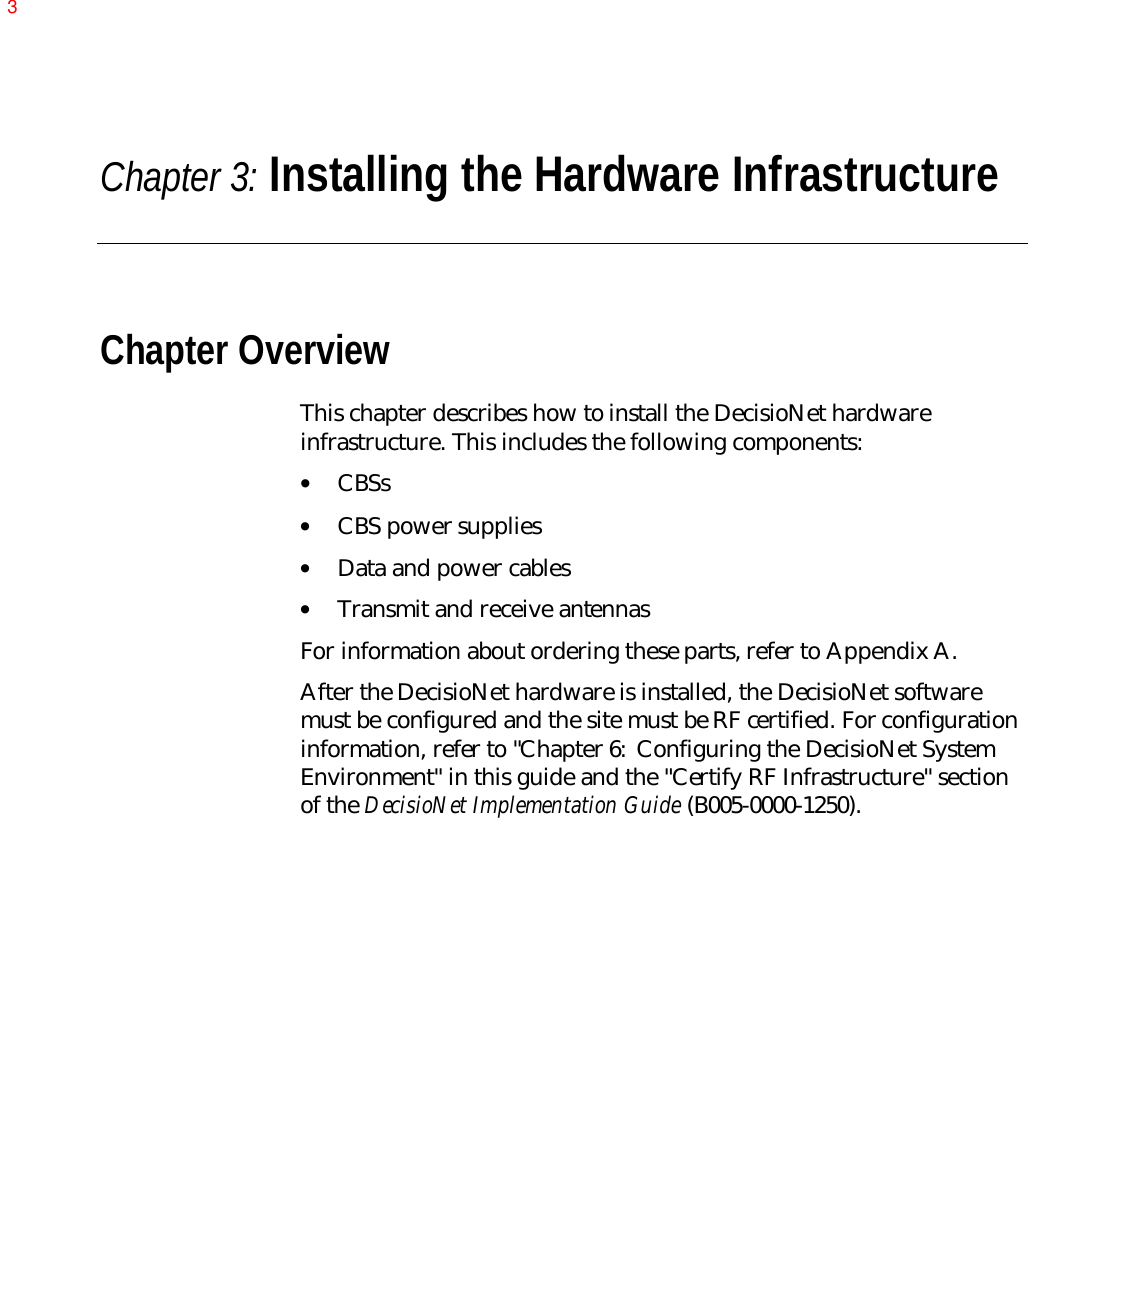 Chapter 3: Installing the Hardware InfrastructureChapter OverviewThis chapter describes how to install the DecisioNet hardwareinfrastructure. This includes the following components:• CBSs• CBS power supplies• Data and power cables• Transmit and receive antennas For information about ordering these parts, refer to Appendix A.After the DecisioNet hardware is installed, the DecisioNet softwaremust be configured and the site must be RF certified. For configurationinformation, refer to &quot;Chapter 6:  Configuring the DecisioNet SystemEnvironment&quot; in this guide and the &quot;Certify RF Infrastructure&quot; sectionof the DecisioNet Implementation Guide (B005-0000-1250).3